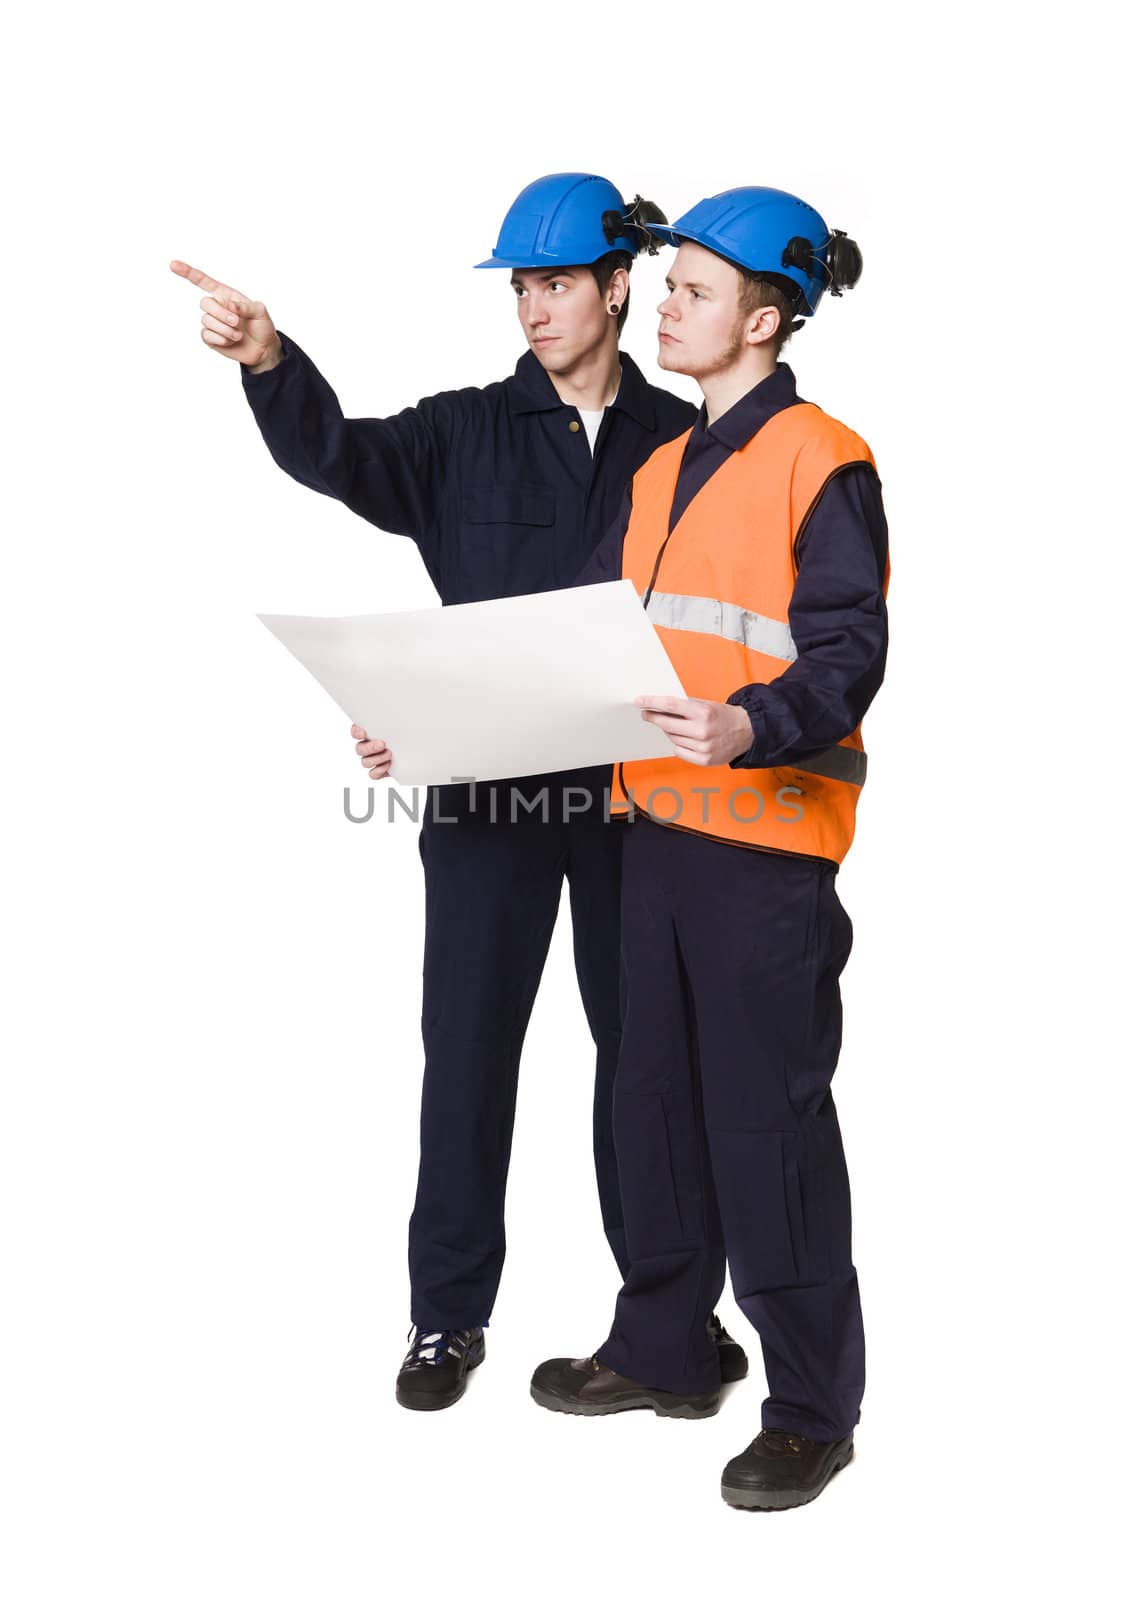 Men in workingclothes